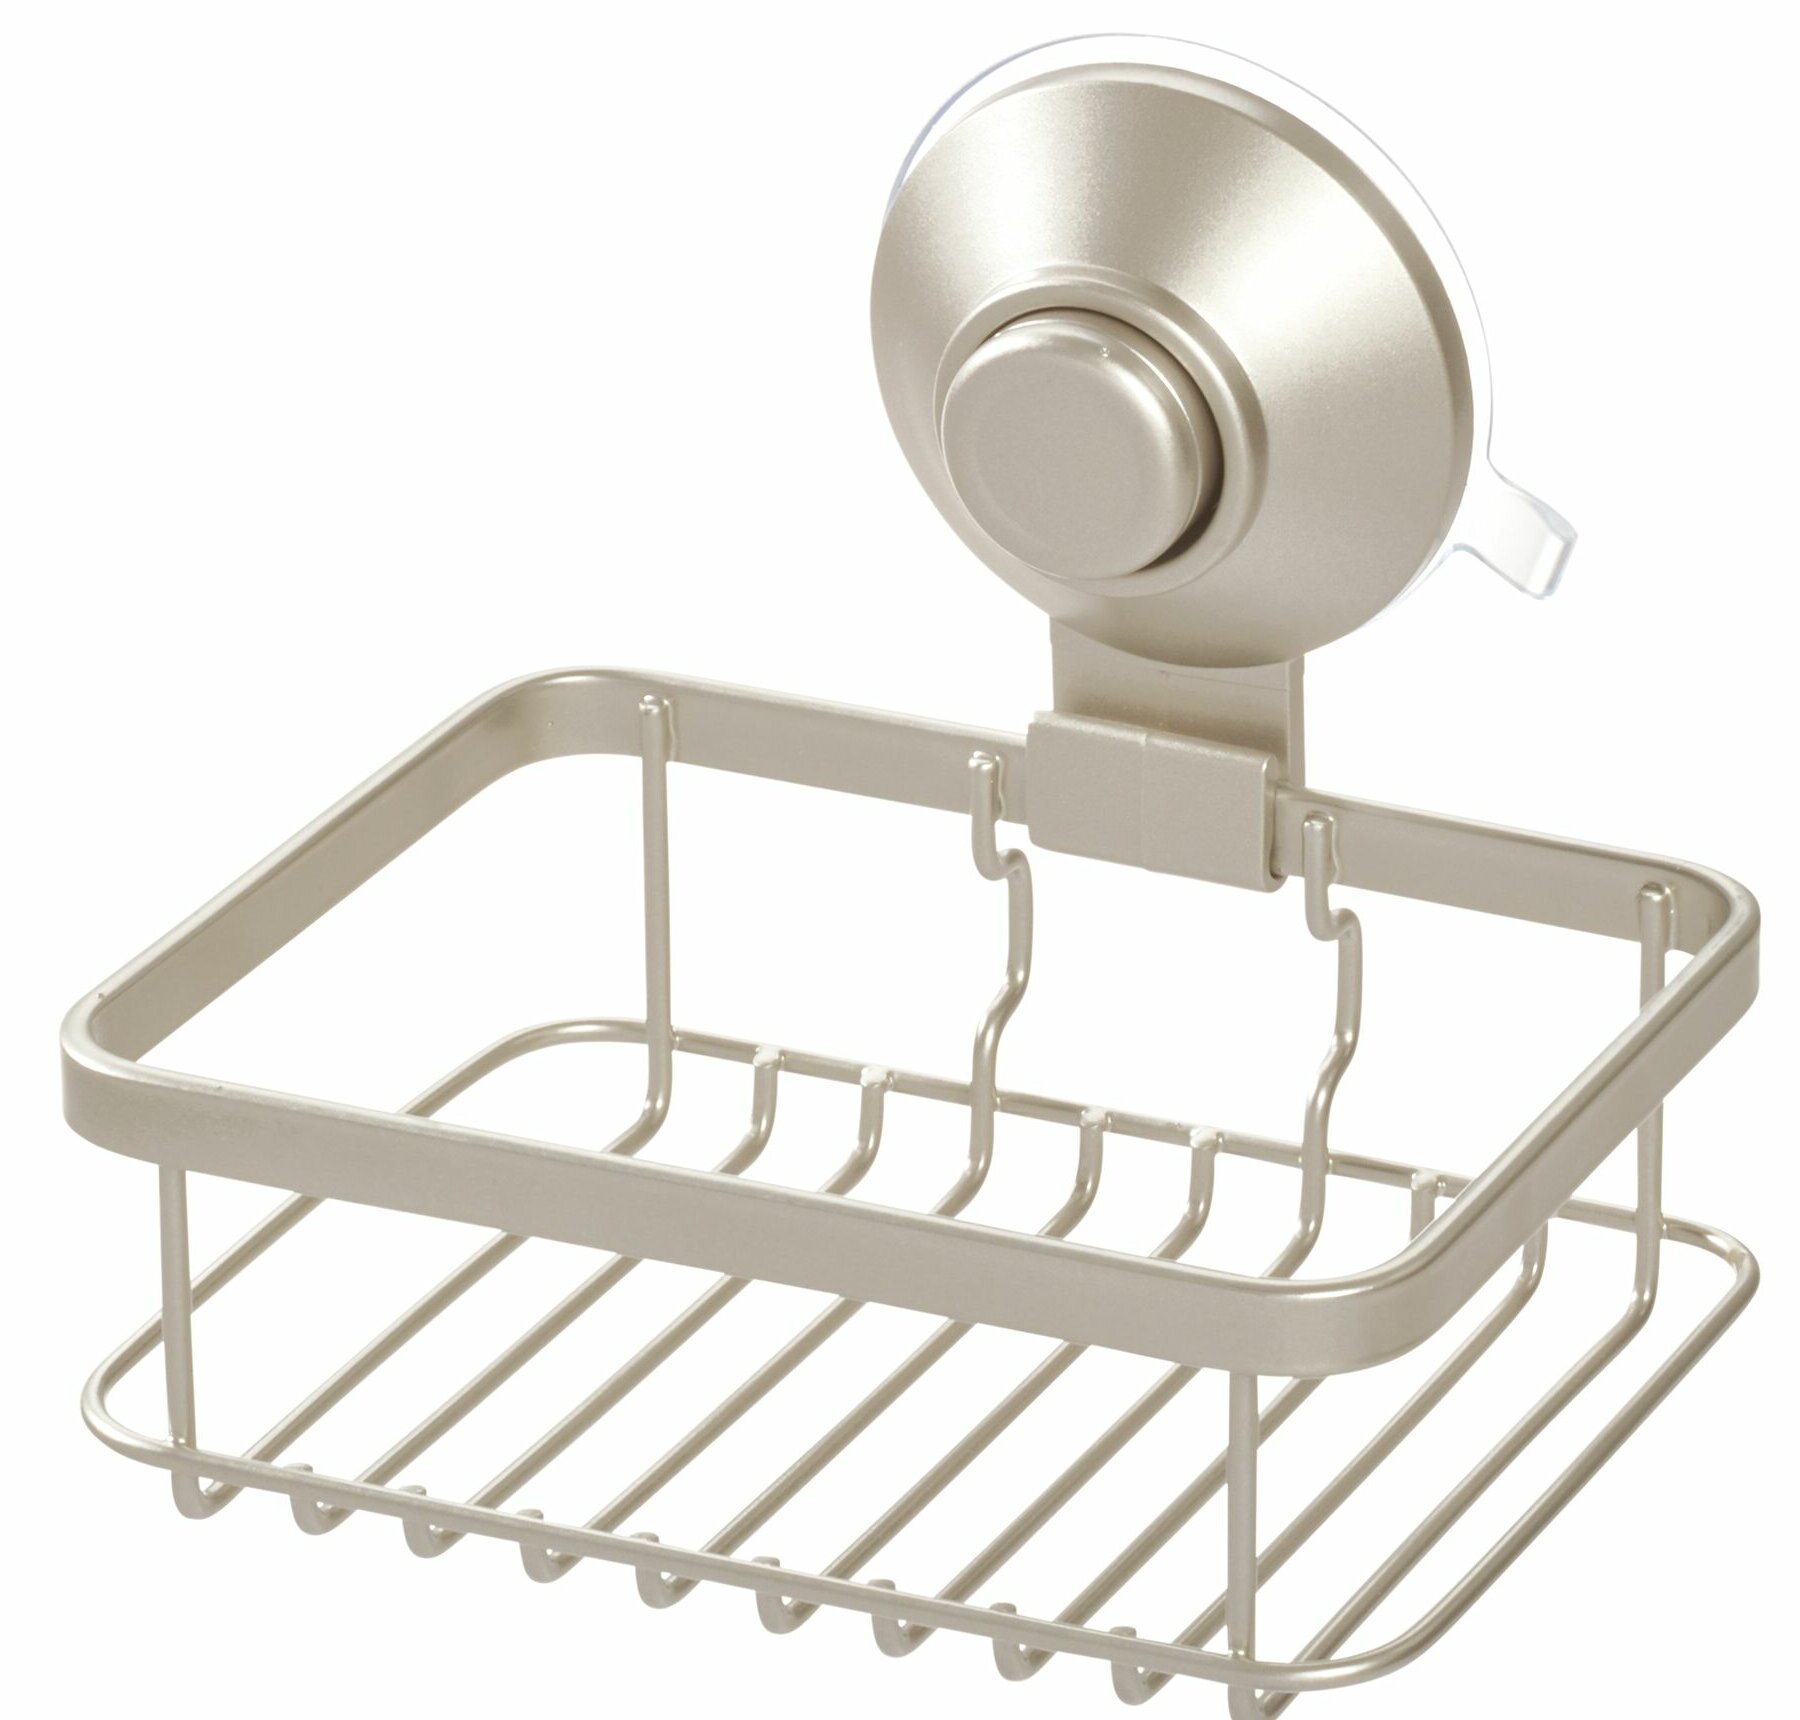 The convenient shower caddy dispenser with top self, soap dish, hooks and  cloth bar